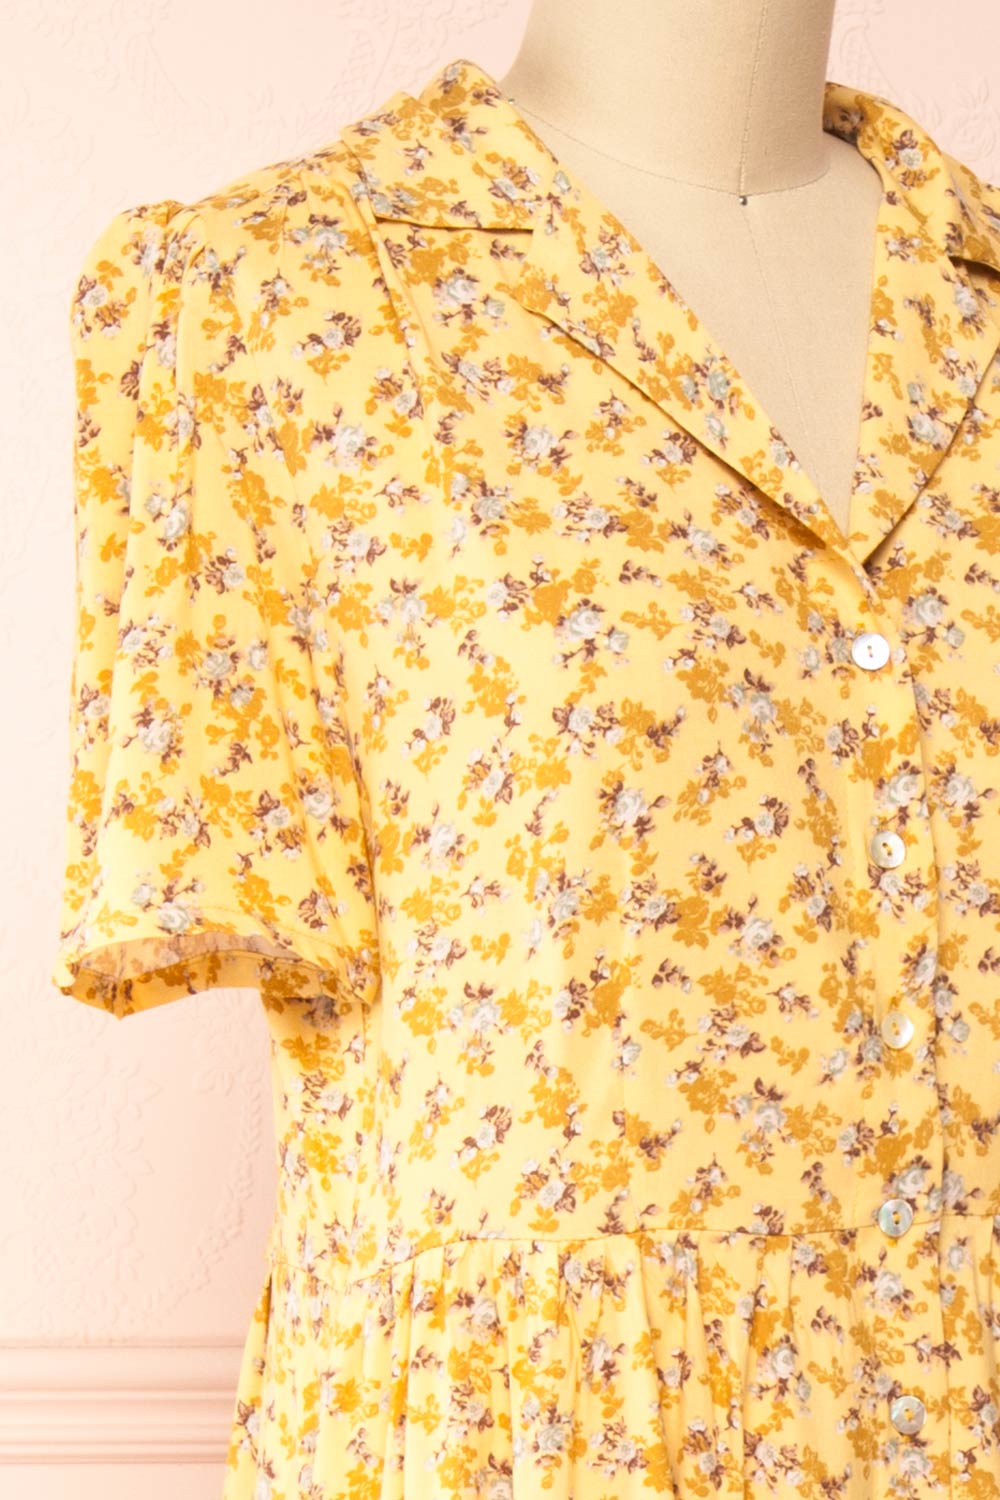 Hayal Yellow Buttoned Floral Midi Shirt Dress | Boutique 1861  side close-up